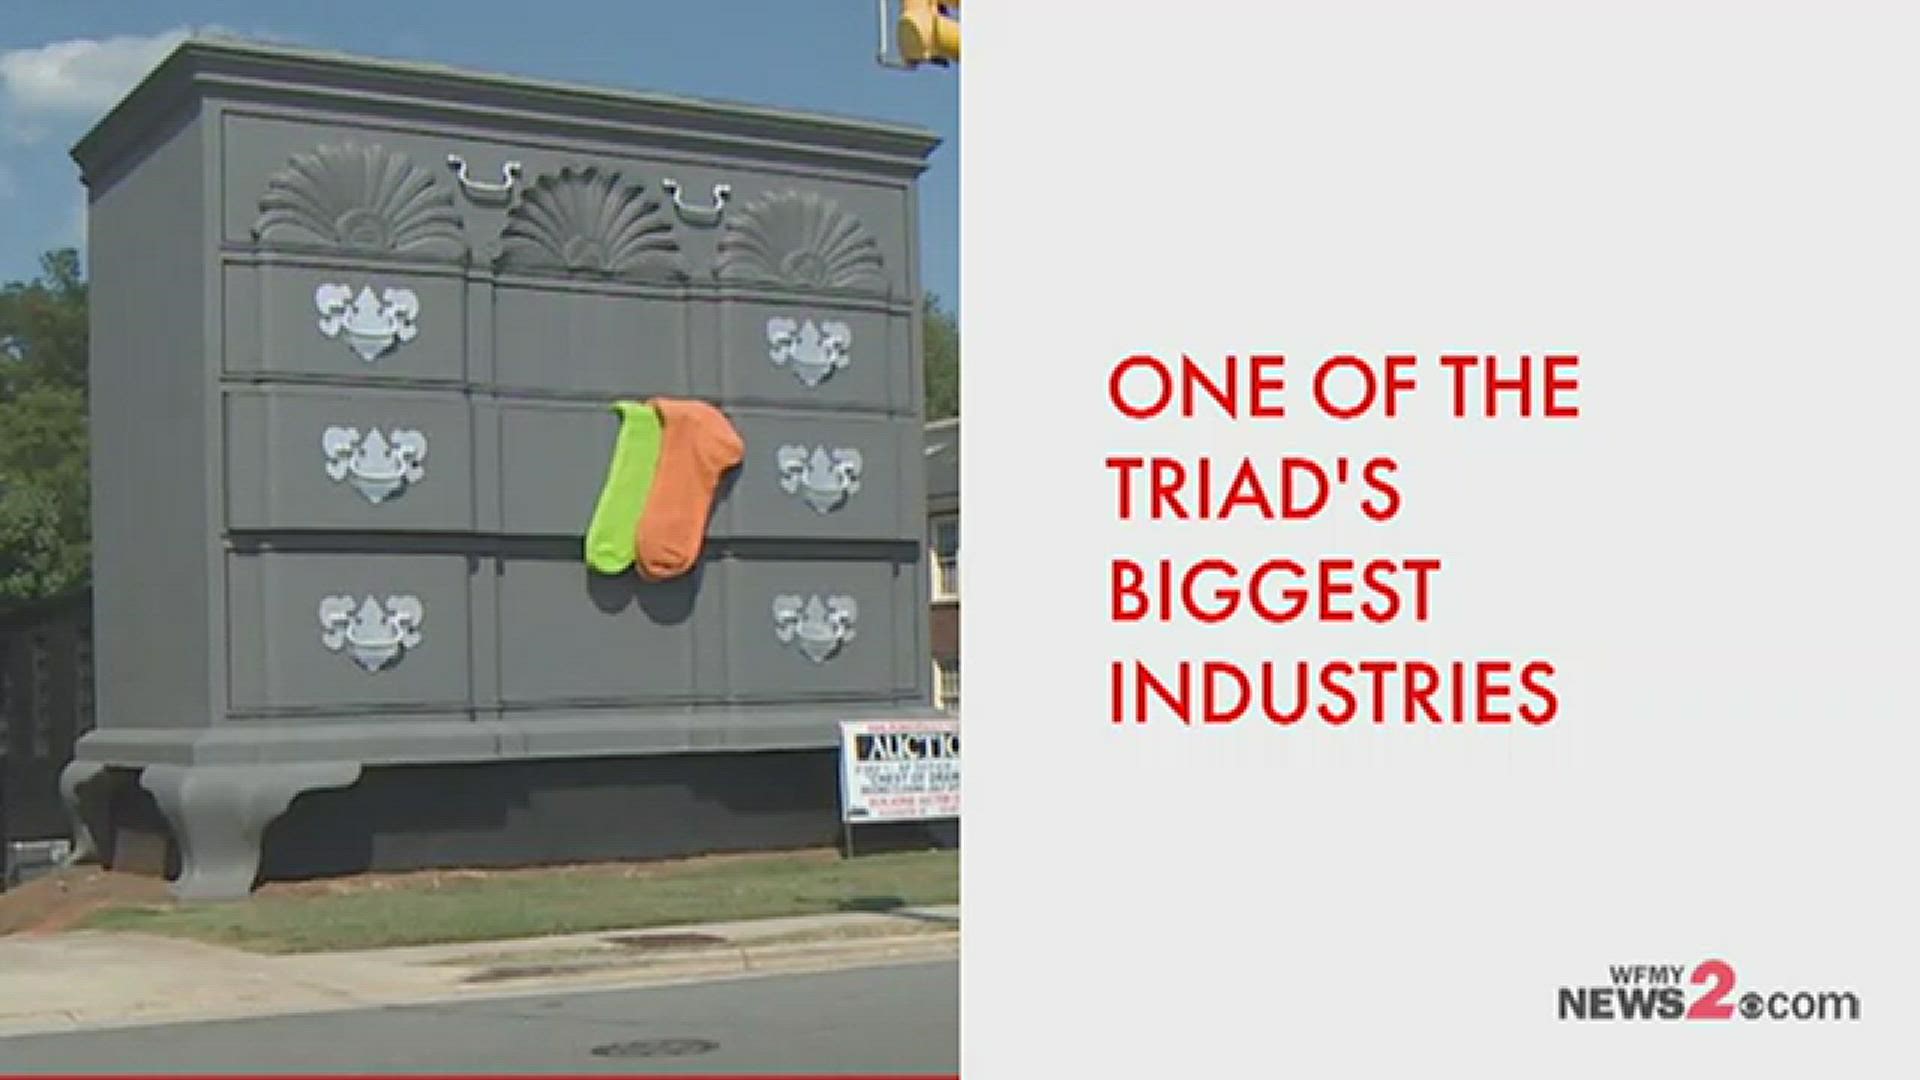 Higher demand plus a nationwide worker shortage are reshaping one of the Triad’s biggest industries.